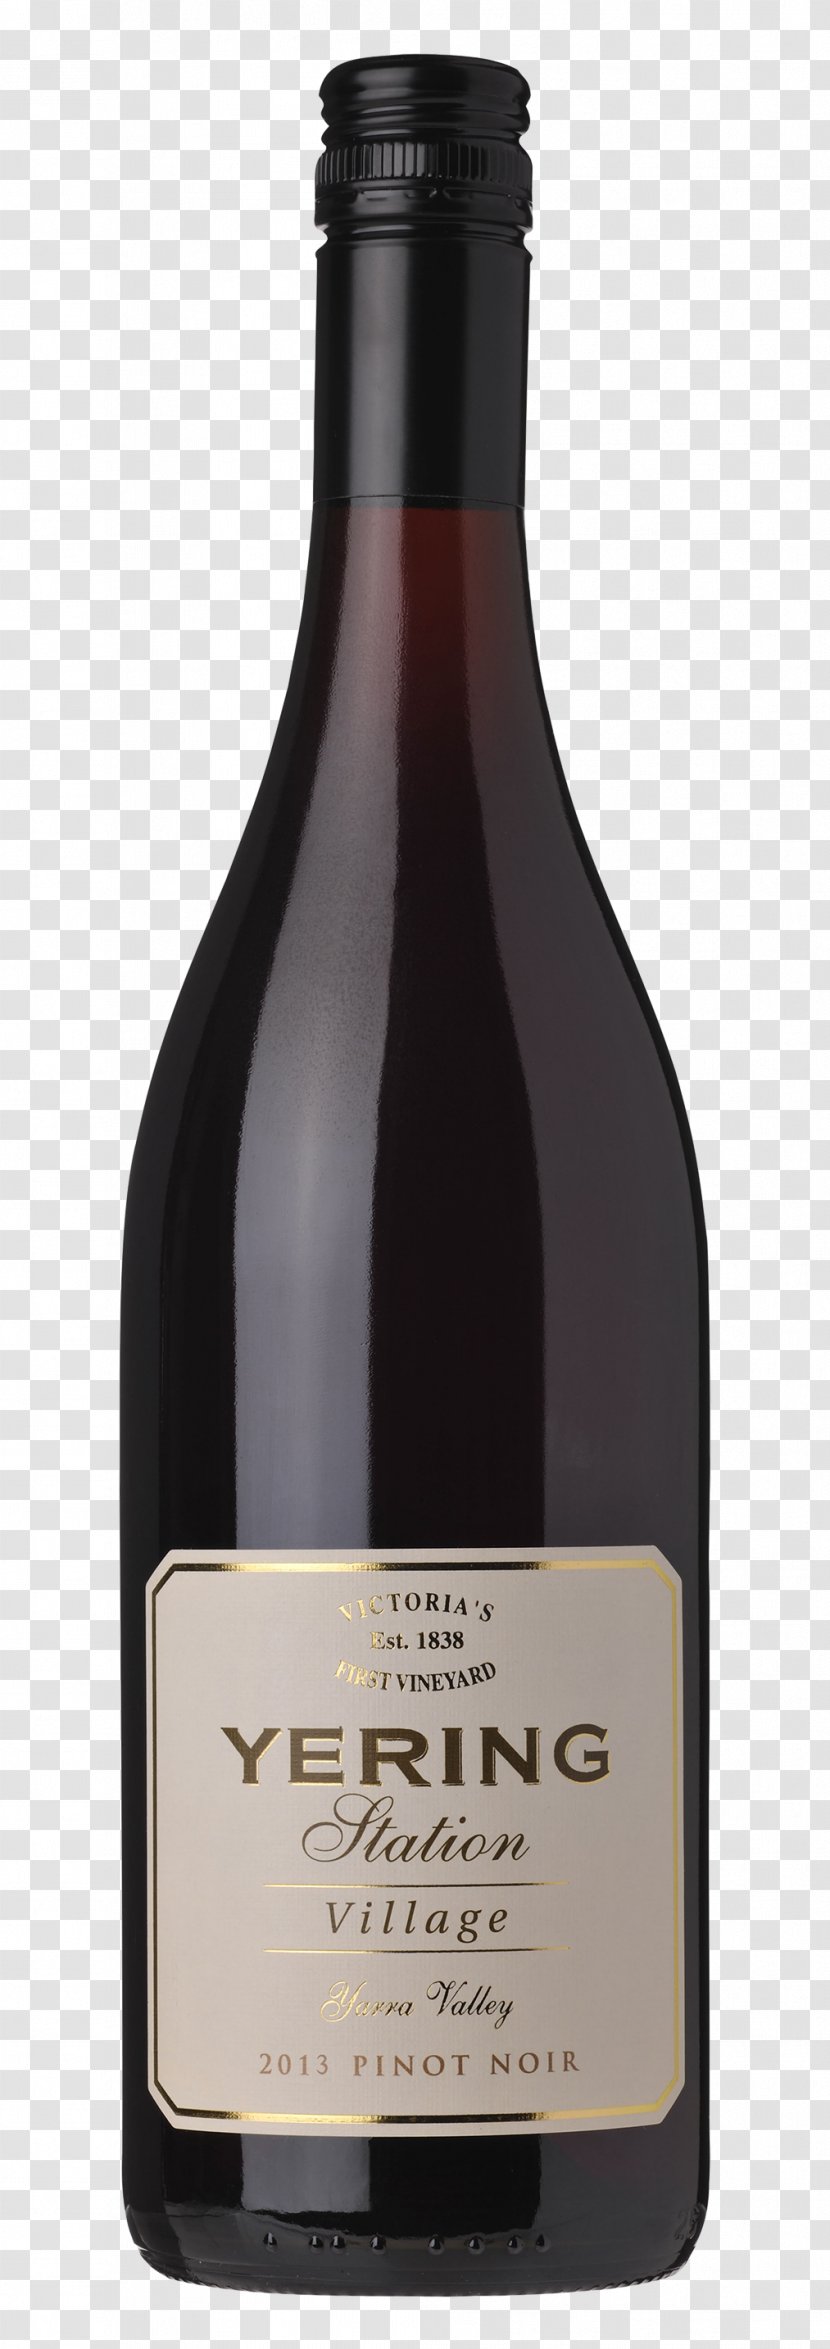 Viognier Yering Station Winery Yarra Valley Saint-Chinian AOC - Wine Bottle Transparent PNG